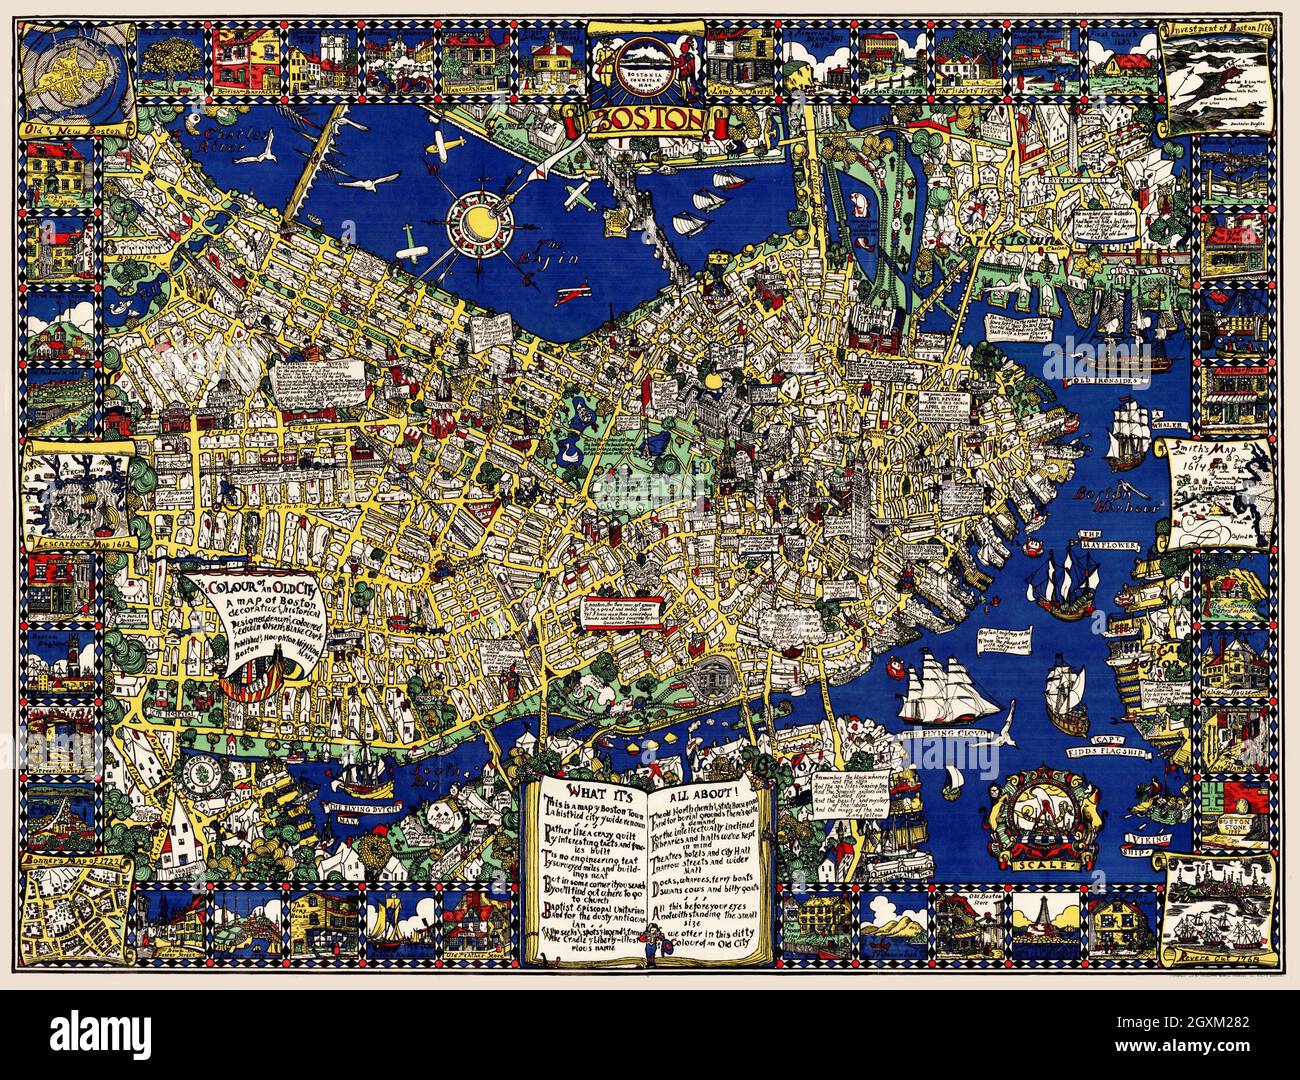 A map of Boston decorative AND historical Stock Photo